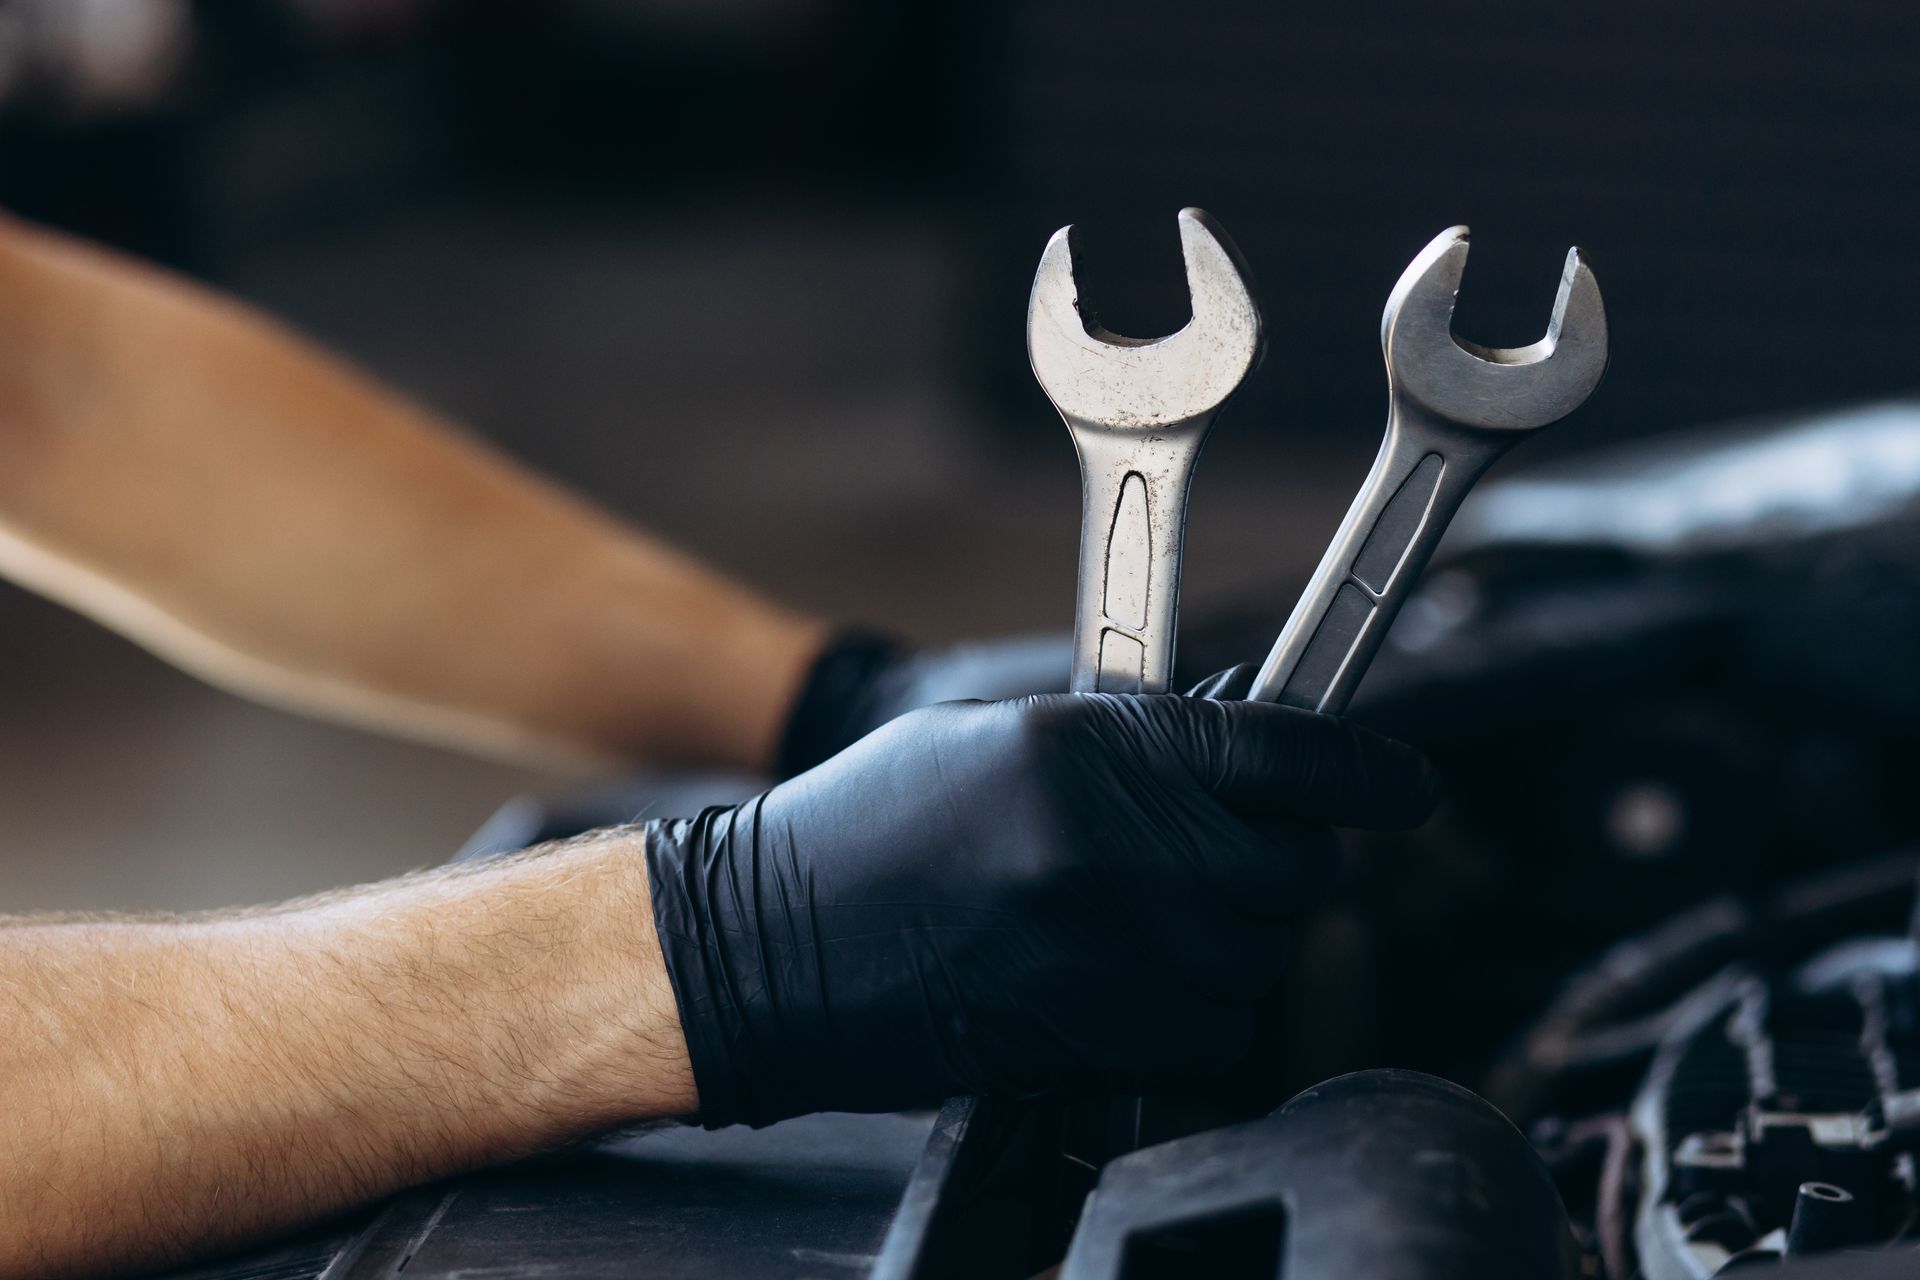 A mechanic wearing black gloves is holding two wrenches in his hands.